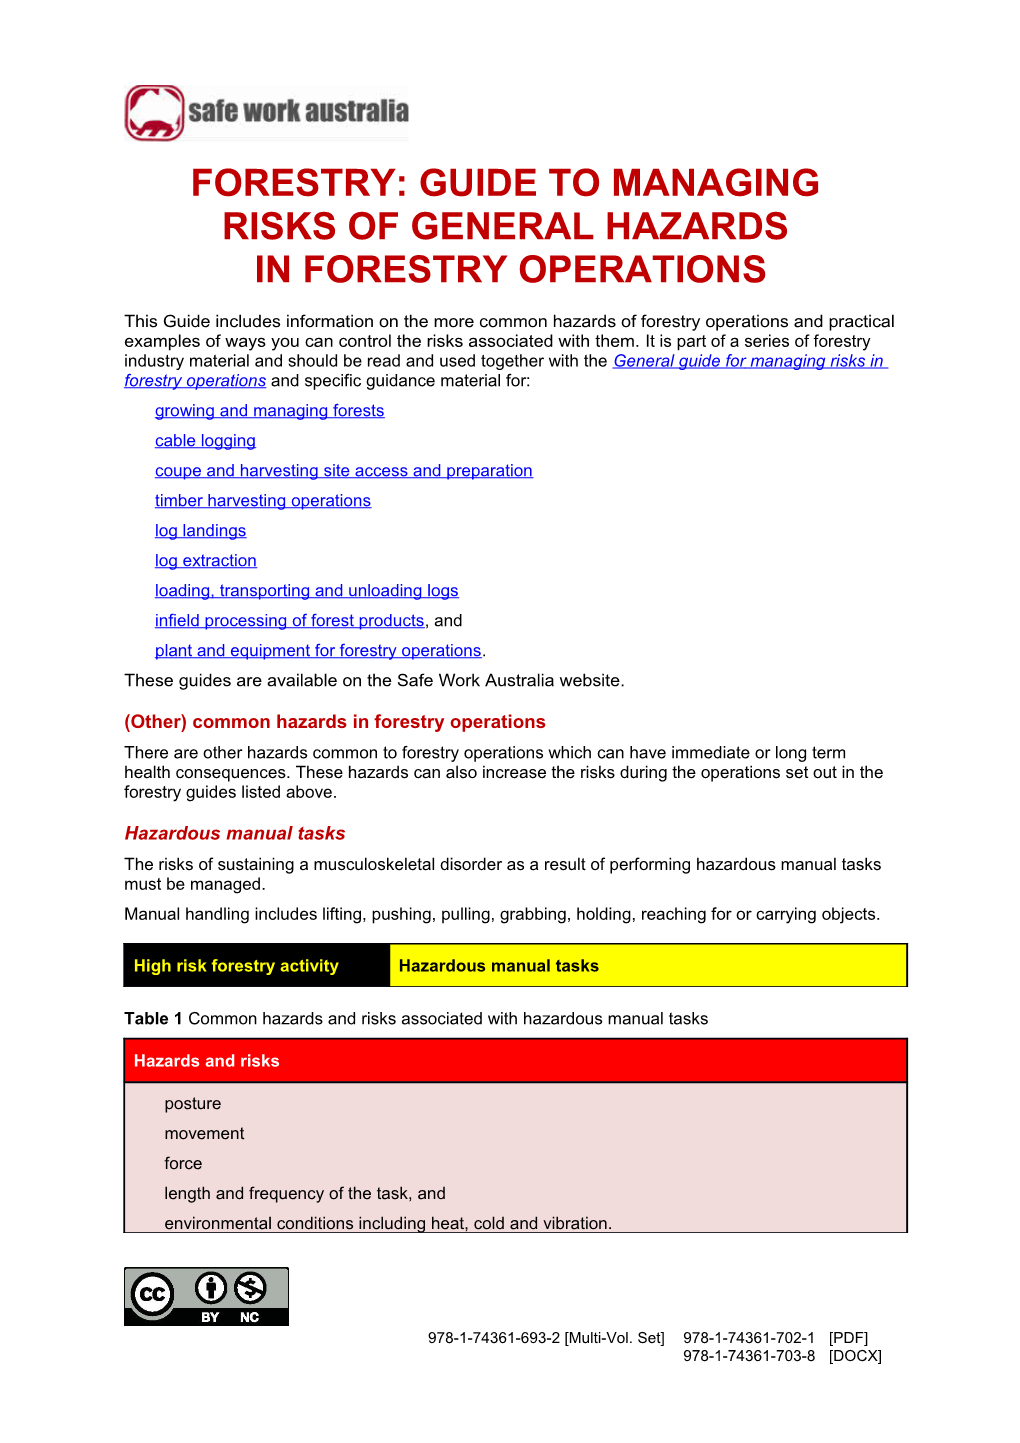 08. Forestry: Guide to Managing Risks of General Hazards in Forestry Operations